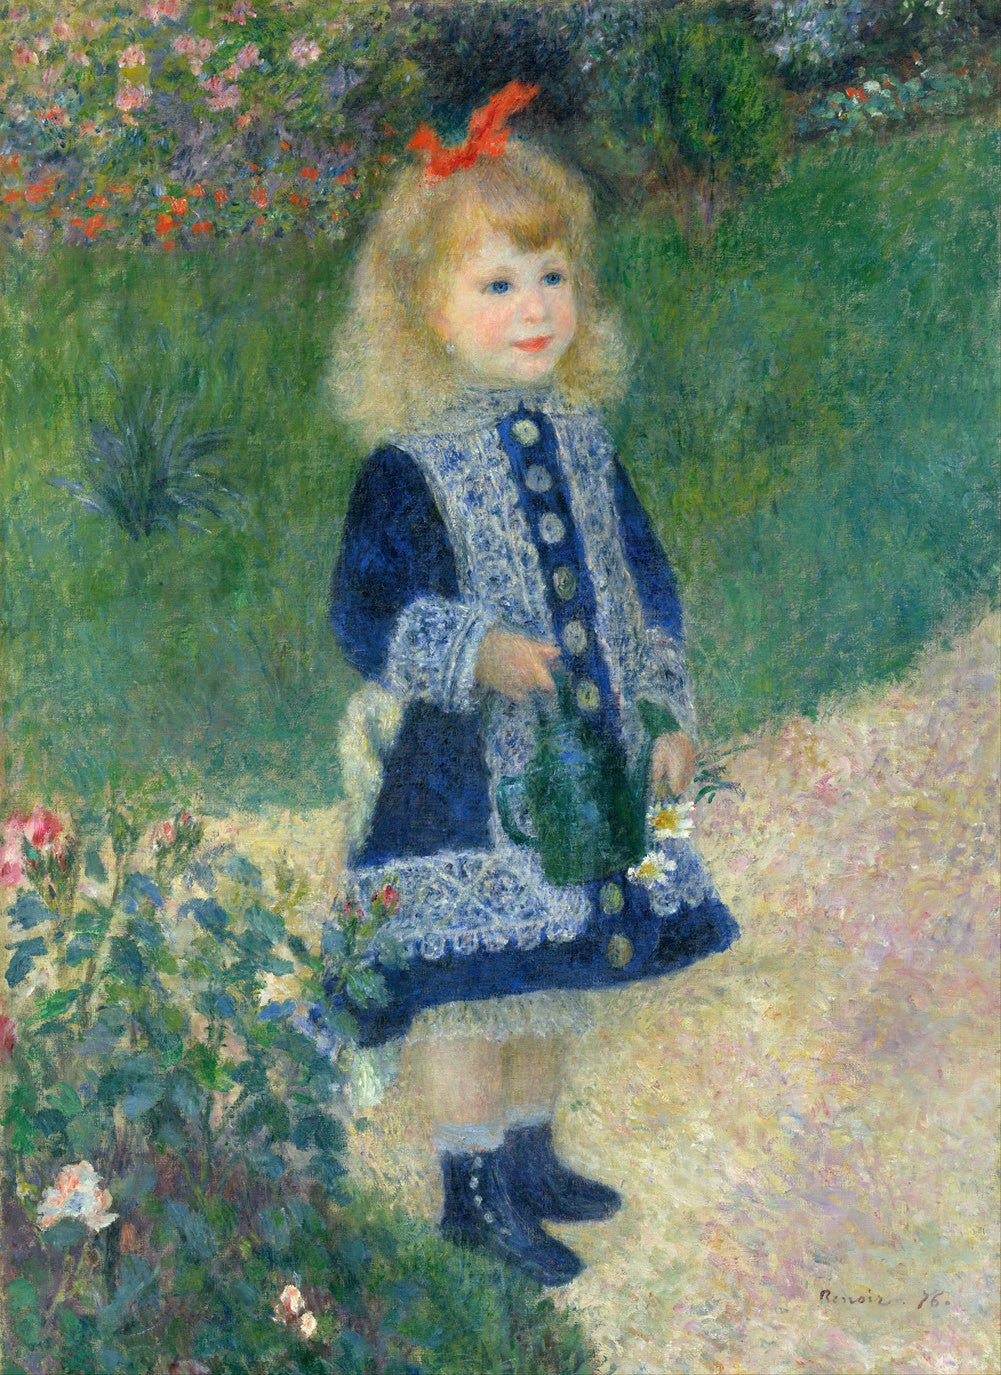 Pierre-Auguste Renoir - A Girl with a Watering Can